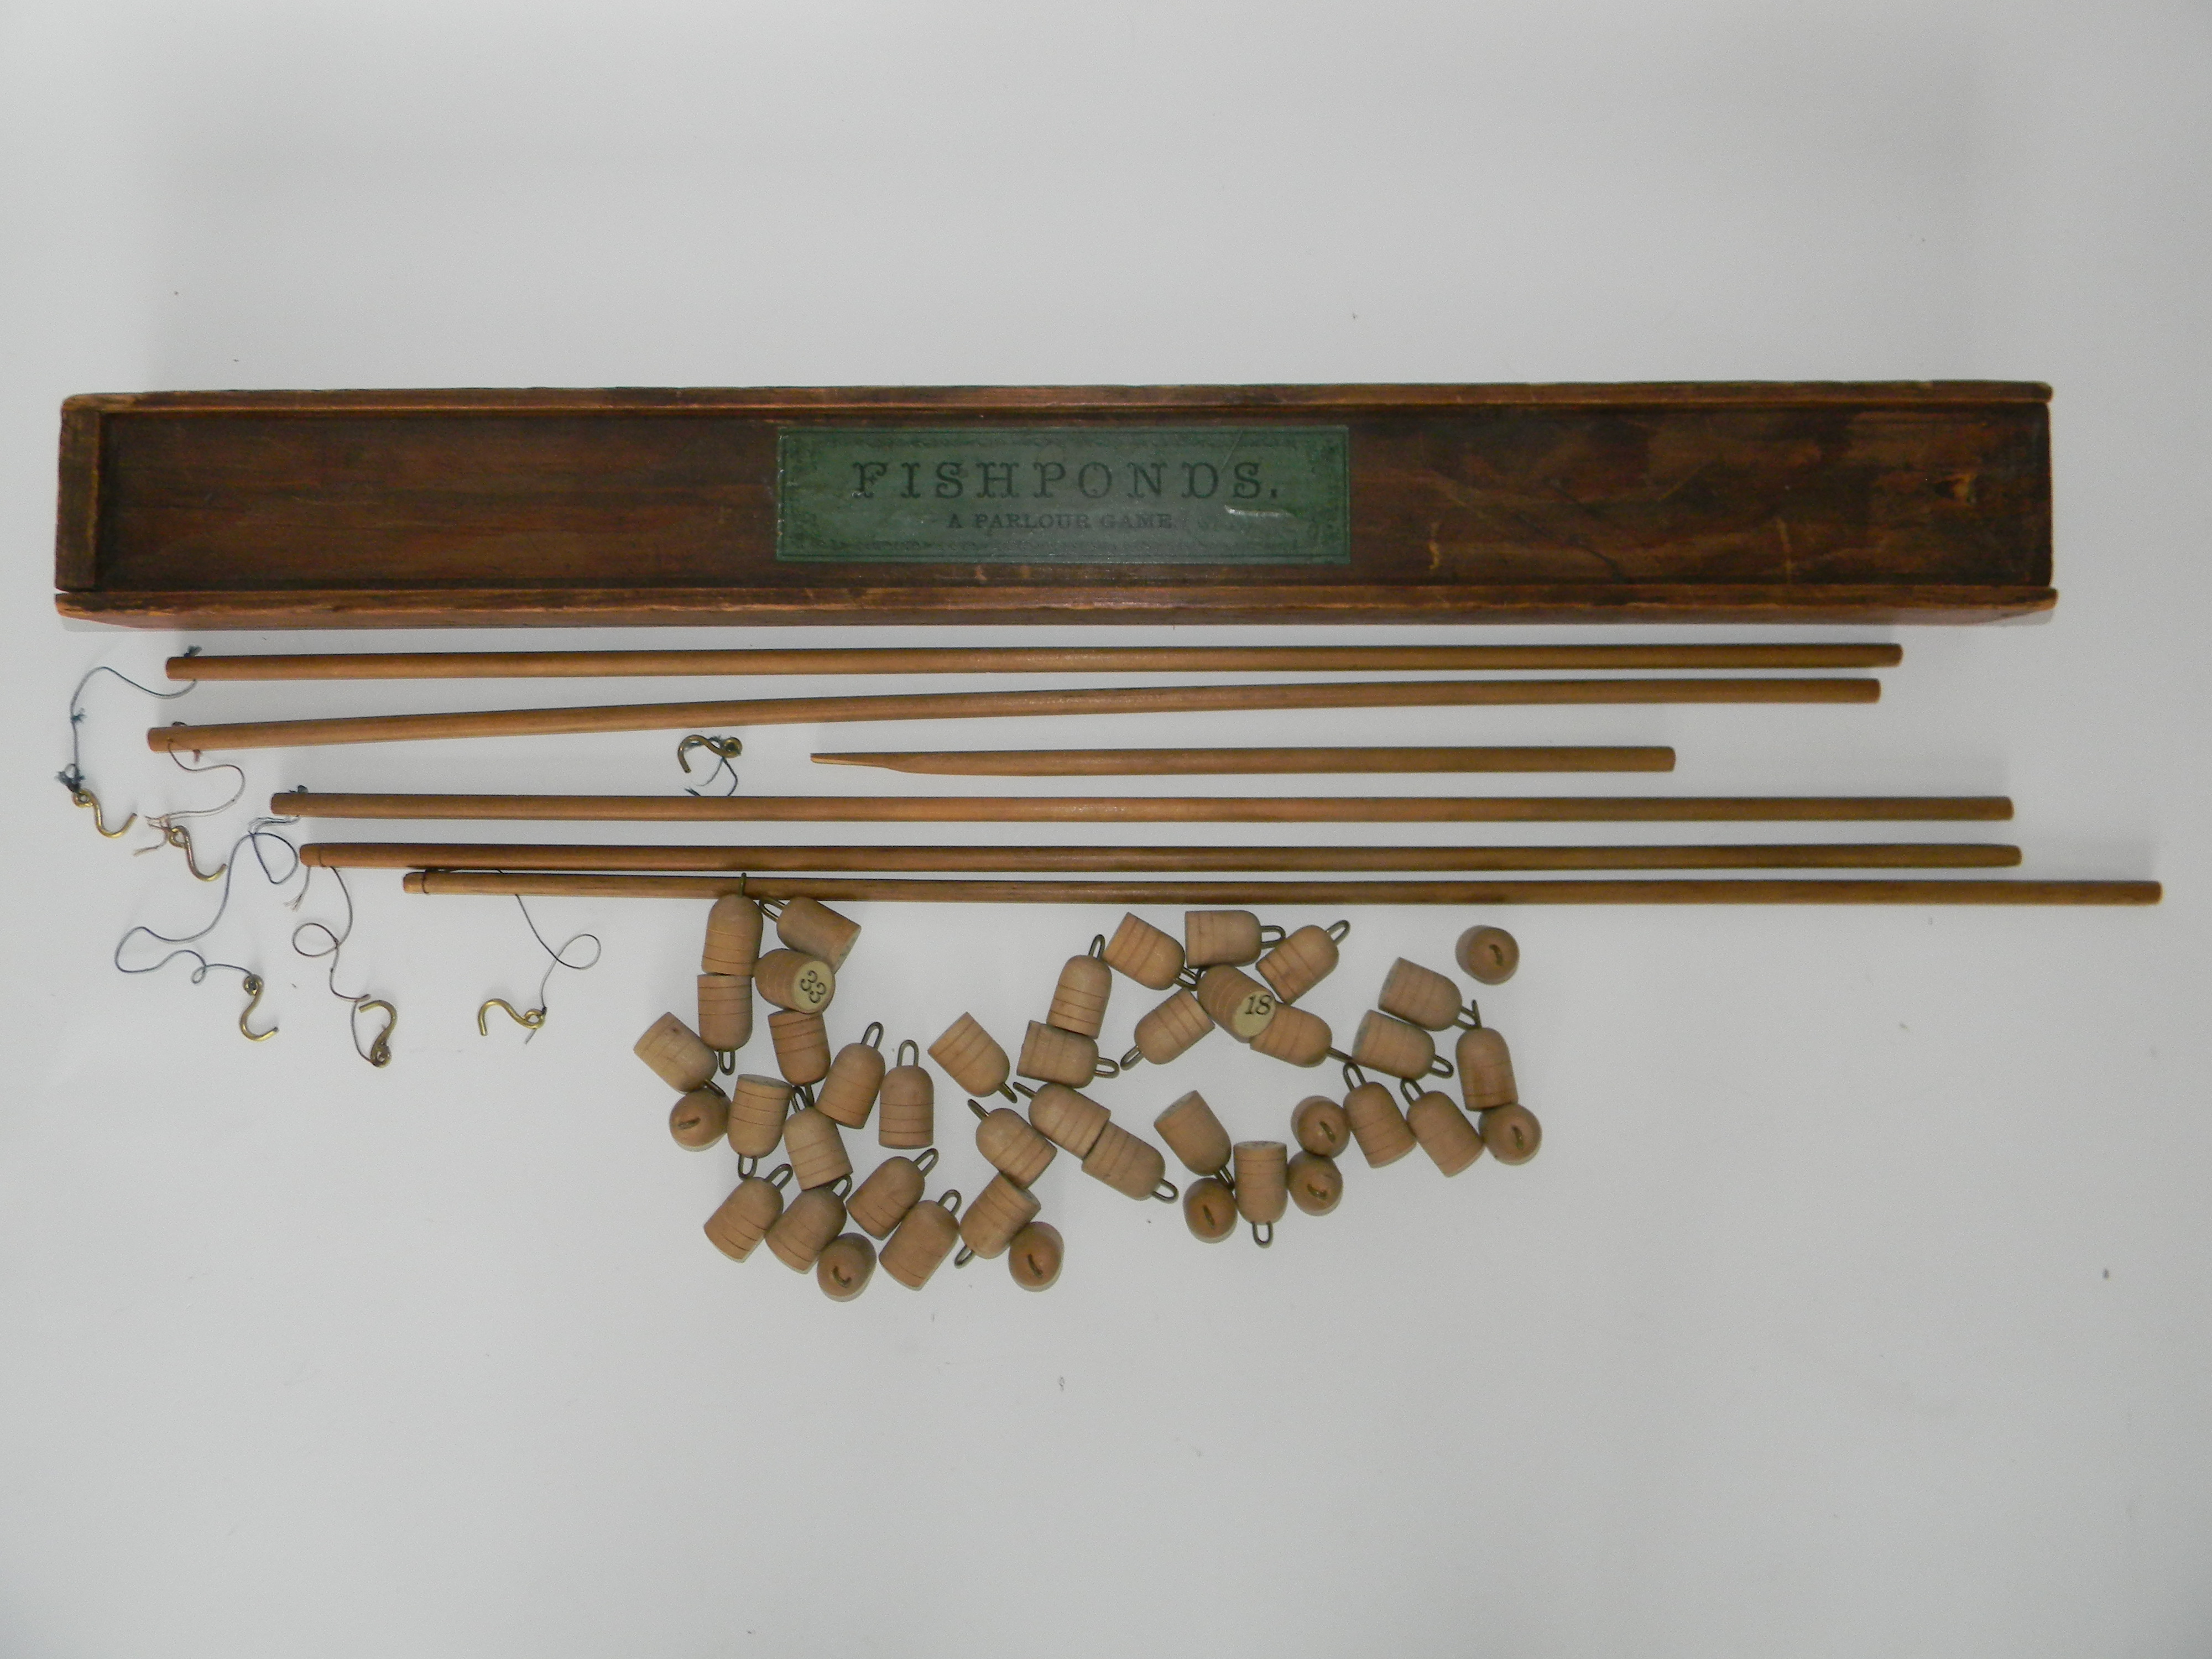 Fishponds, an early English Parlour game by Alfred Seeley, circa 1855, wooden box with sliding lid